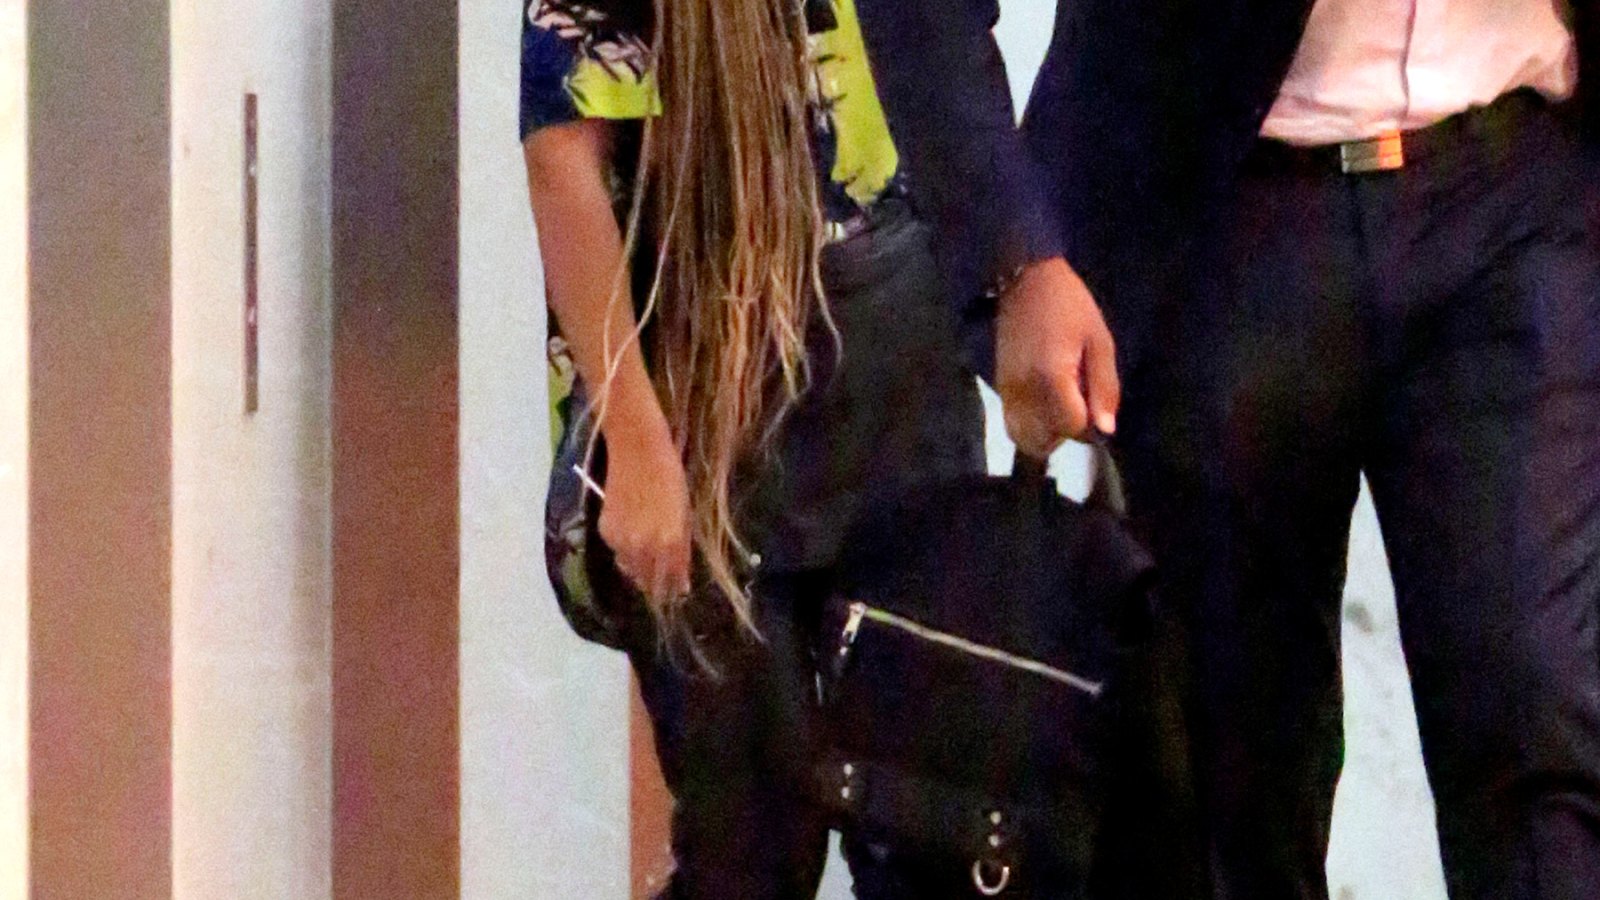 Beyonce shows off her new braided hair while out with Jay Z in NYC